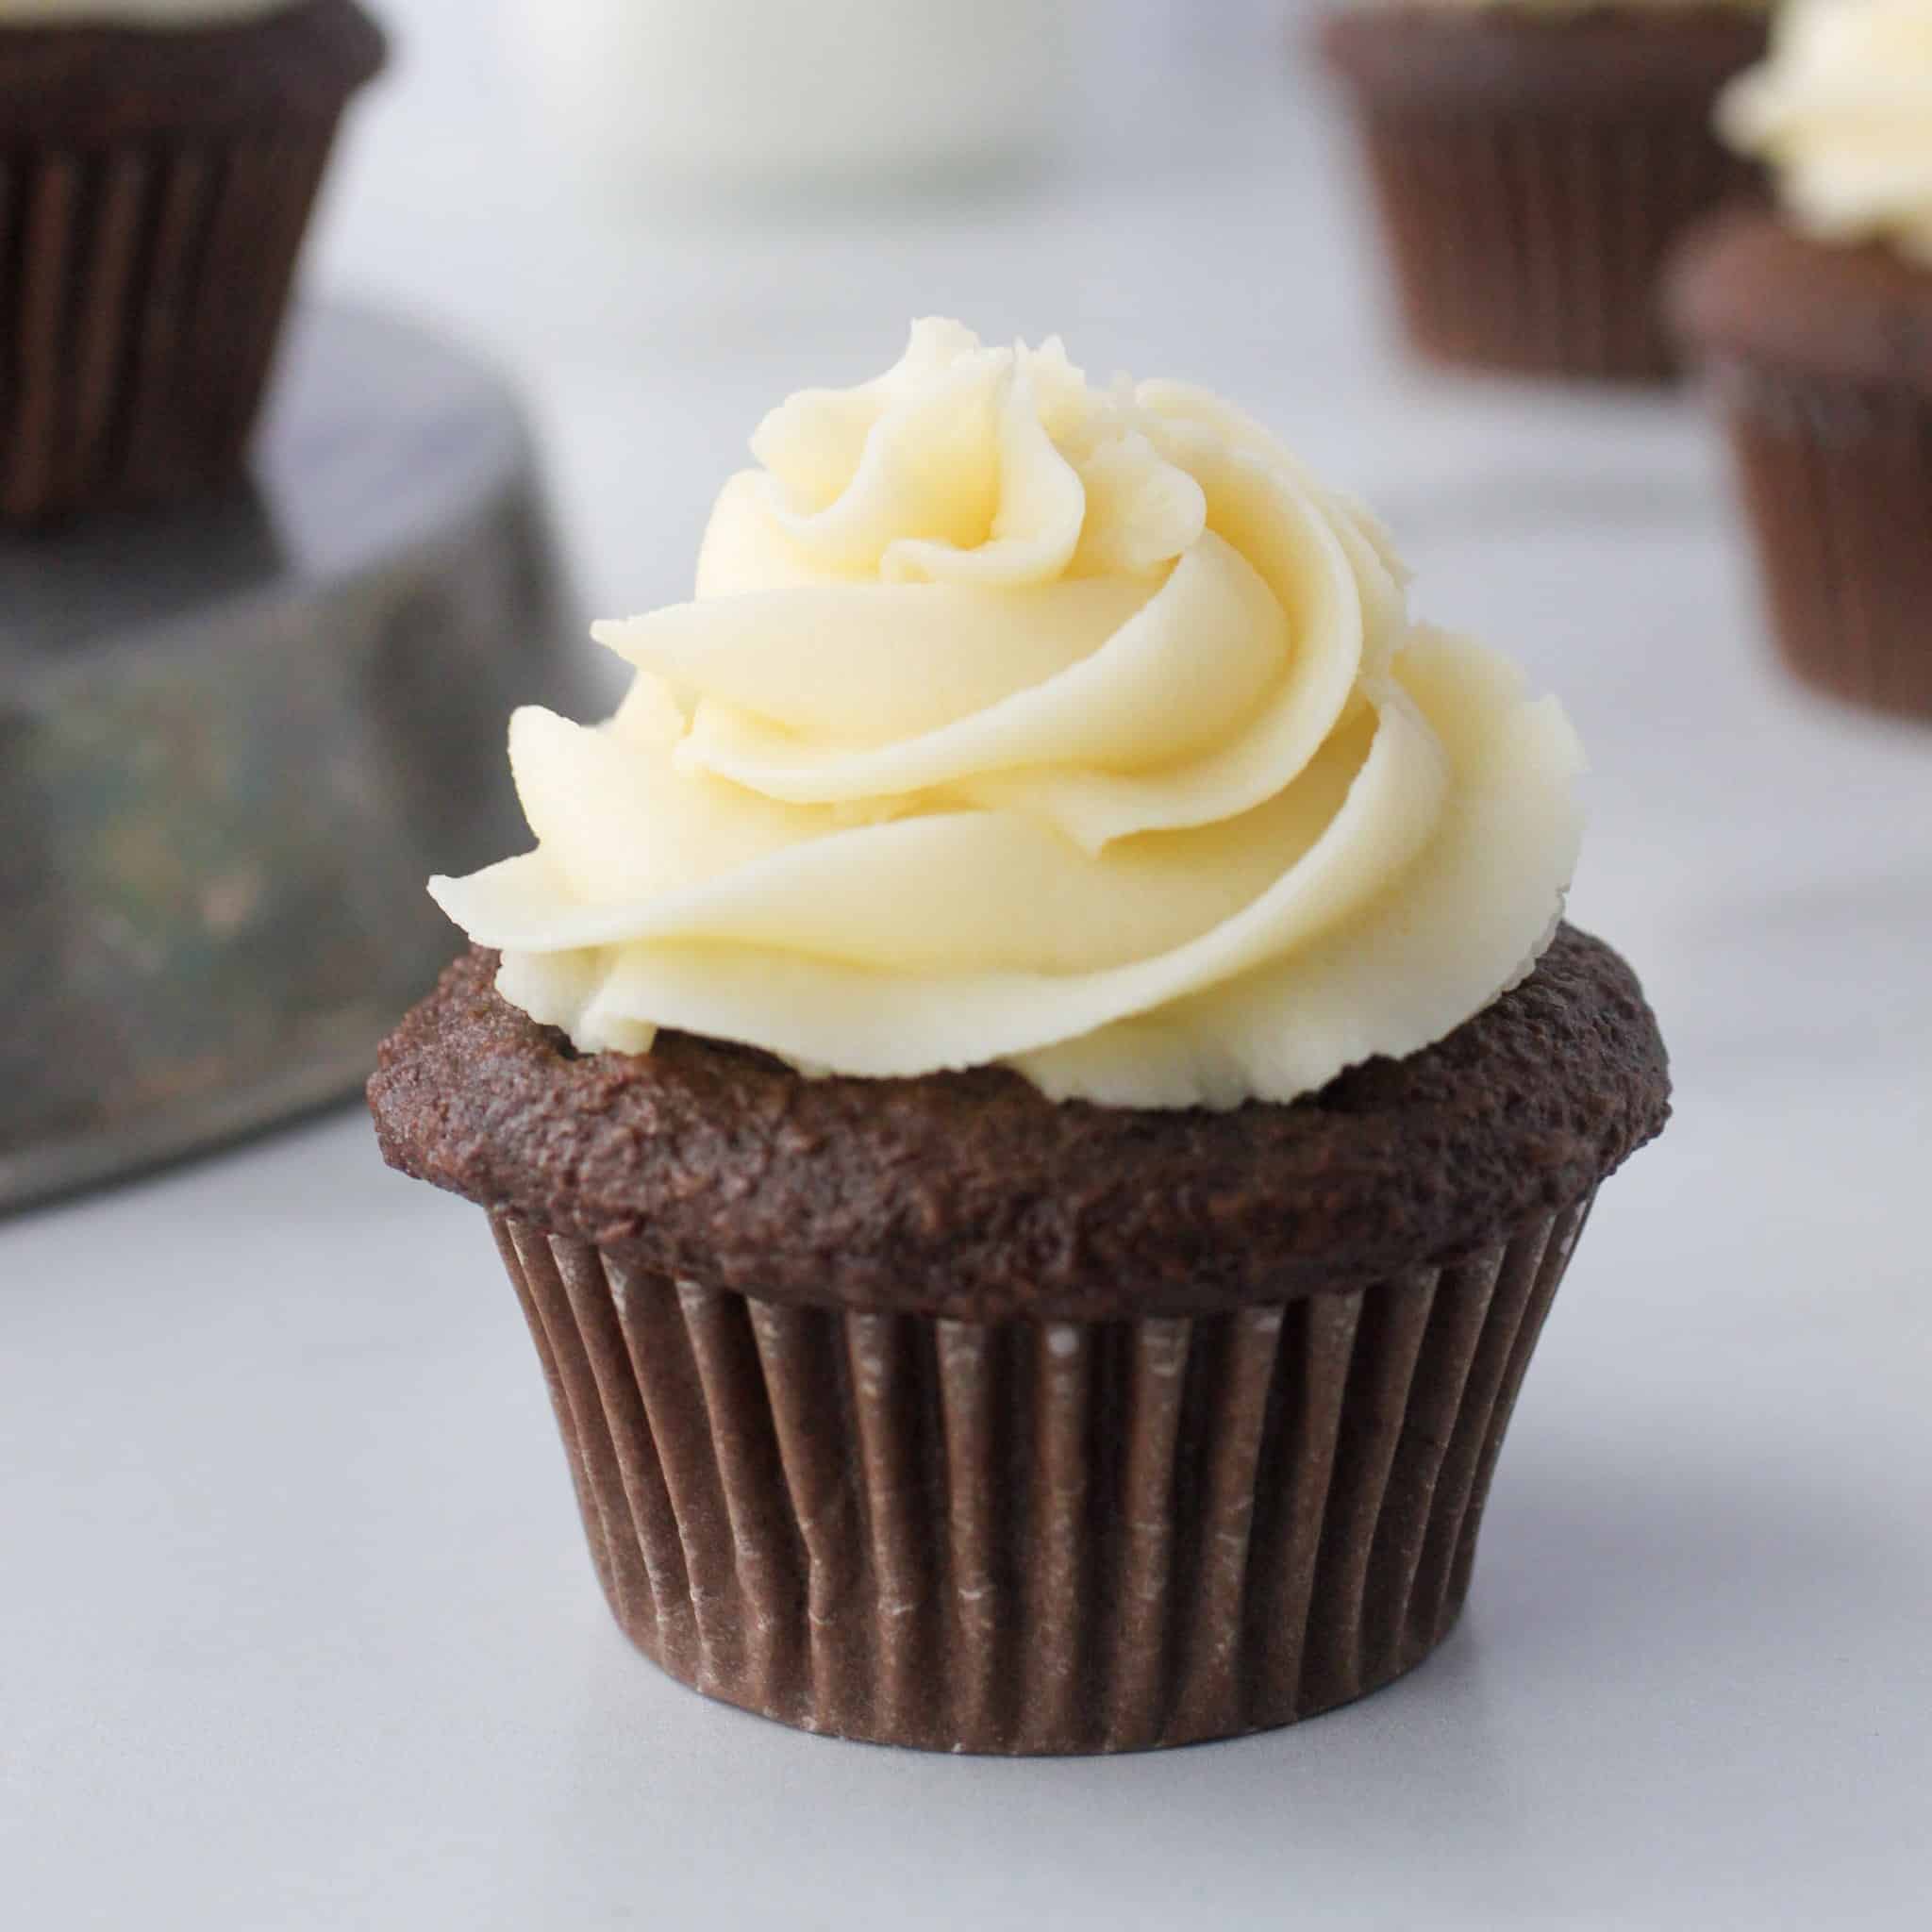 Chocolate cupcake with buttercream icing.